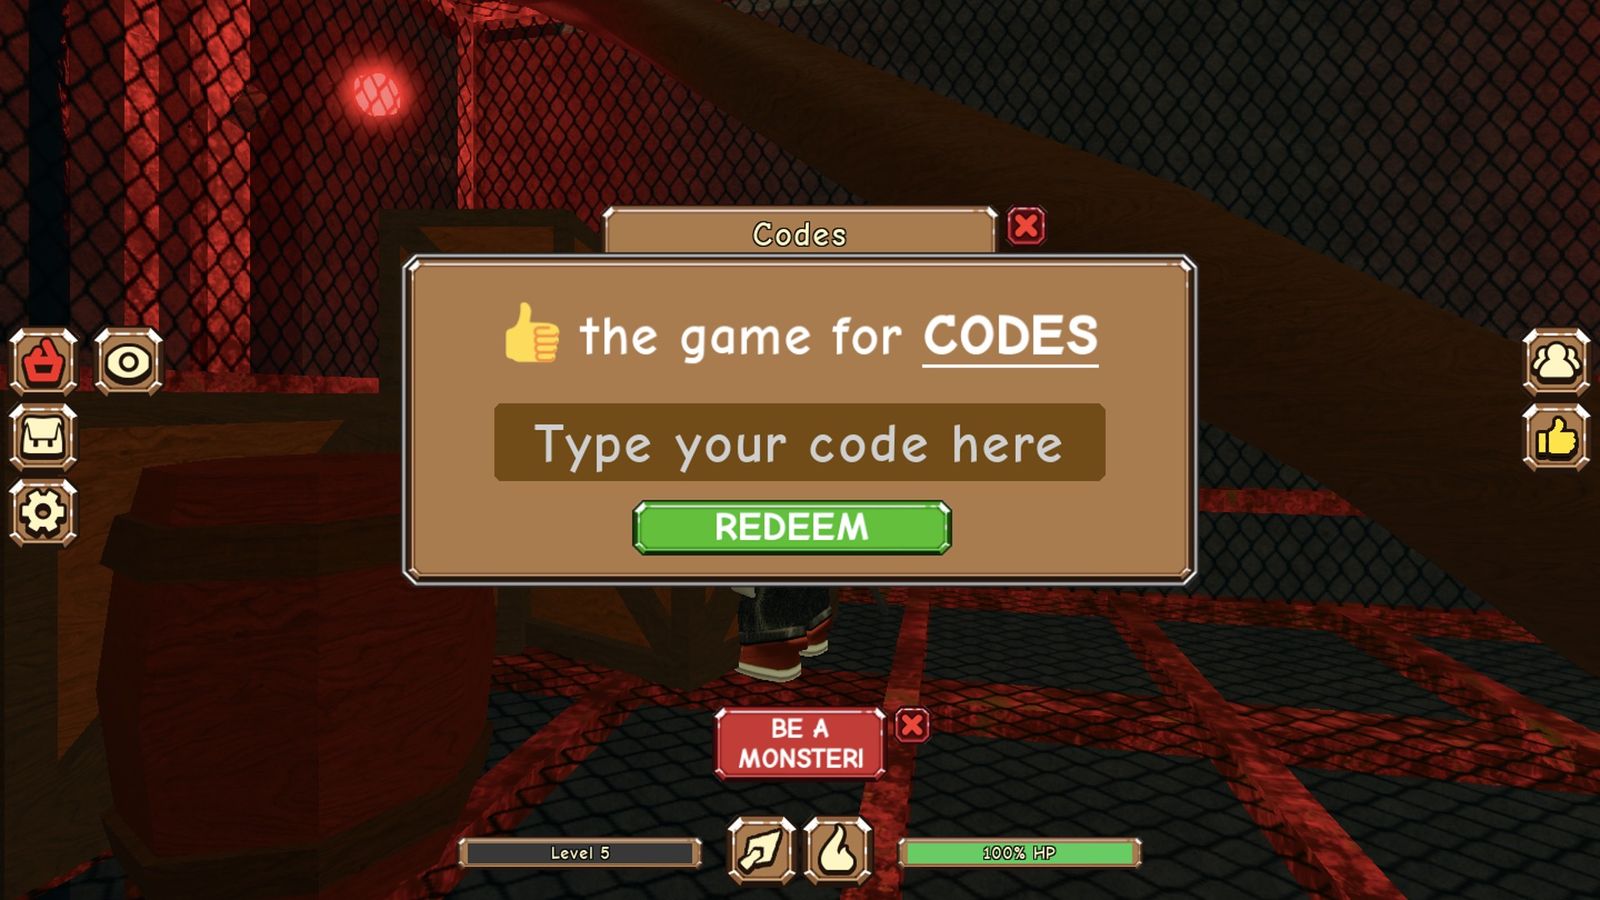 Image of The Maze Runner code redemption screen on Roblox